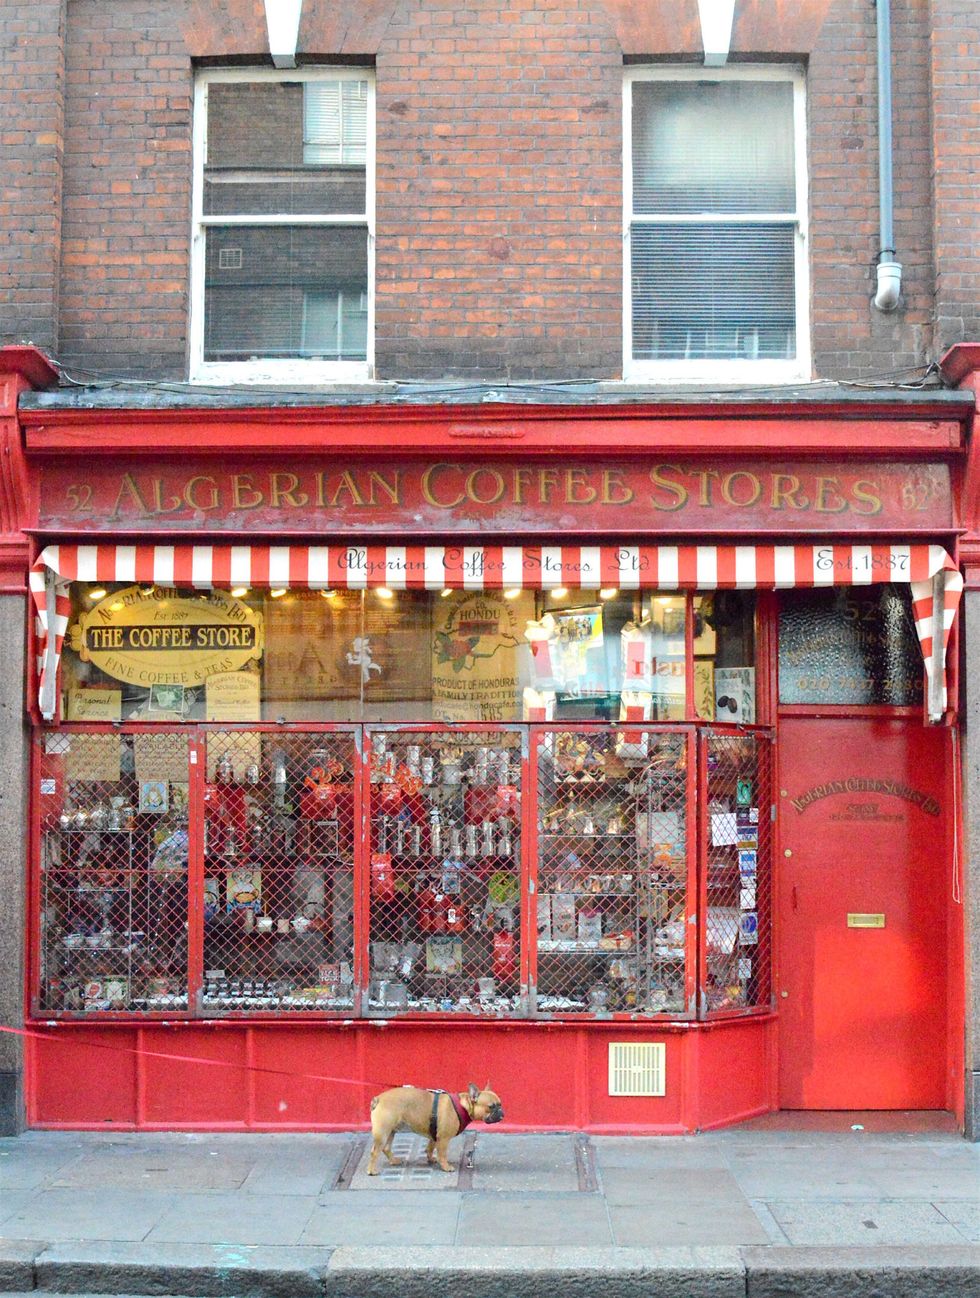 A lot goes on in this vibrant neighborhood–similar to New York's Soho, here you can find cute vintage shops, specialty stores (like this <a href="http://www.algcoffee.co.uk/" target="_blank">adorable coffee shop</a>) and some of the most fashionable alternative clubs in town.<br><br>